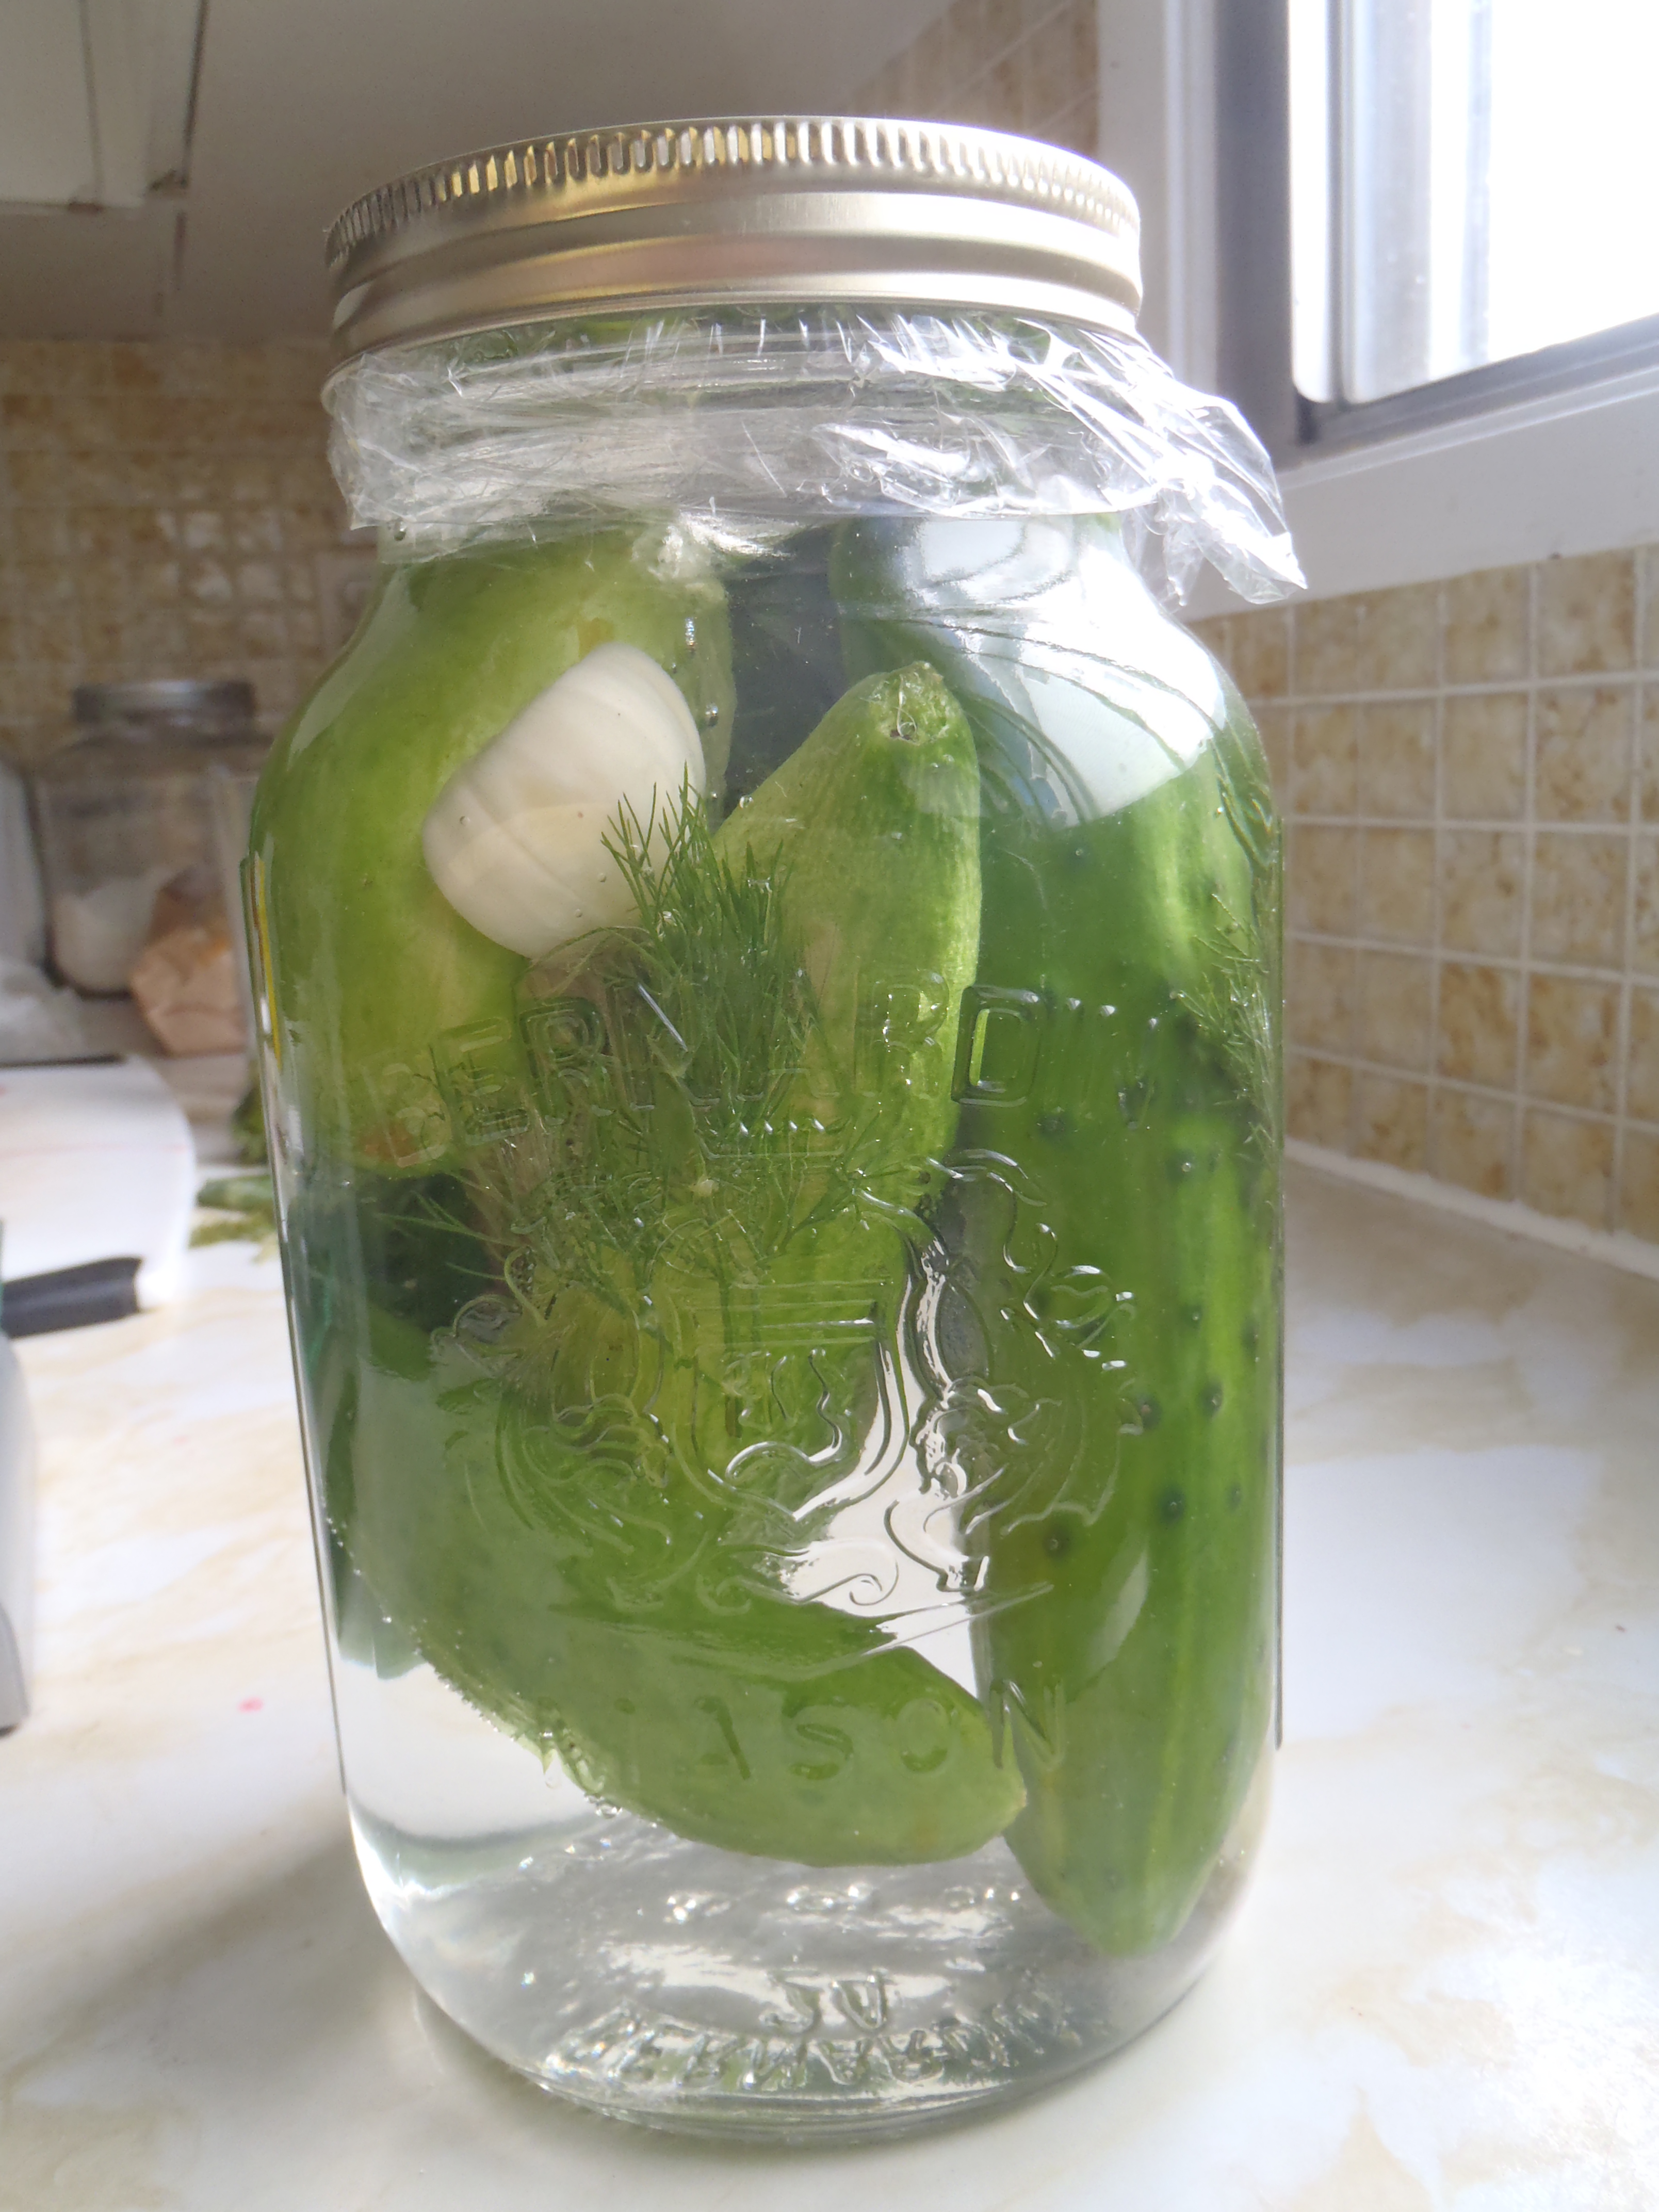 Naturally fermented dill pickles